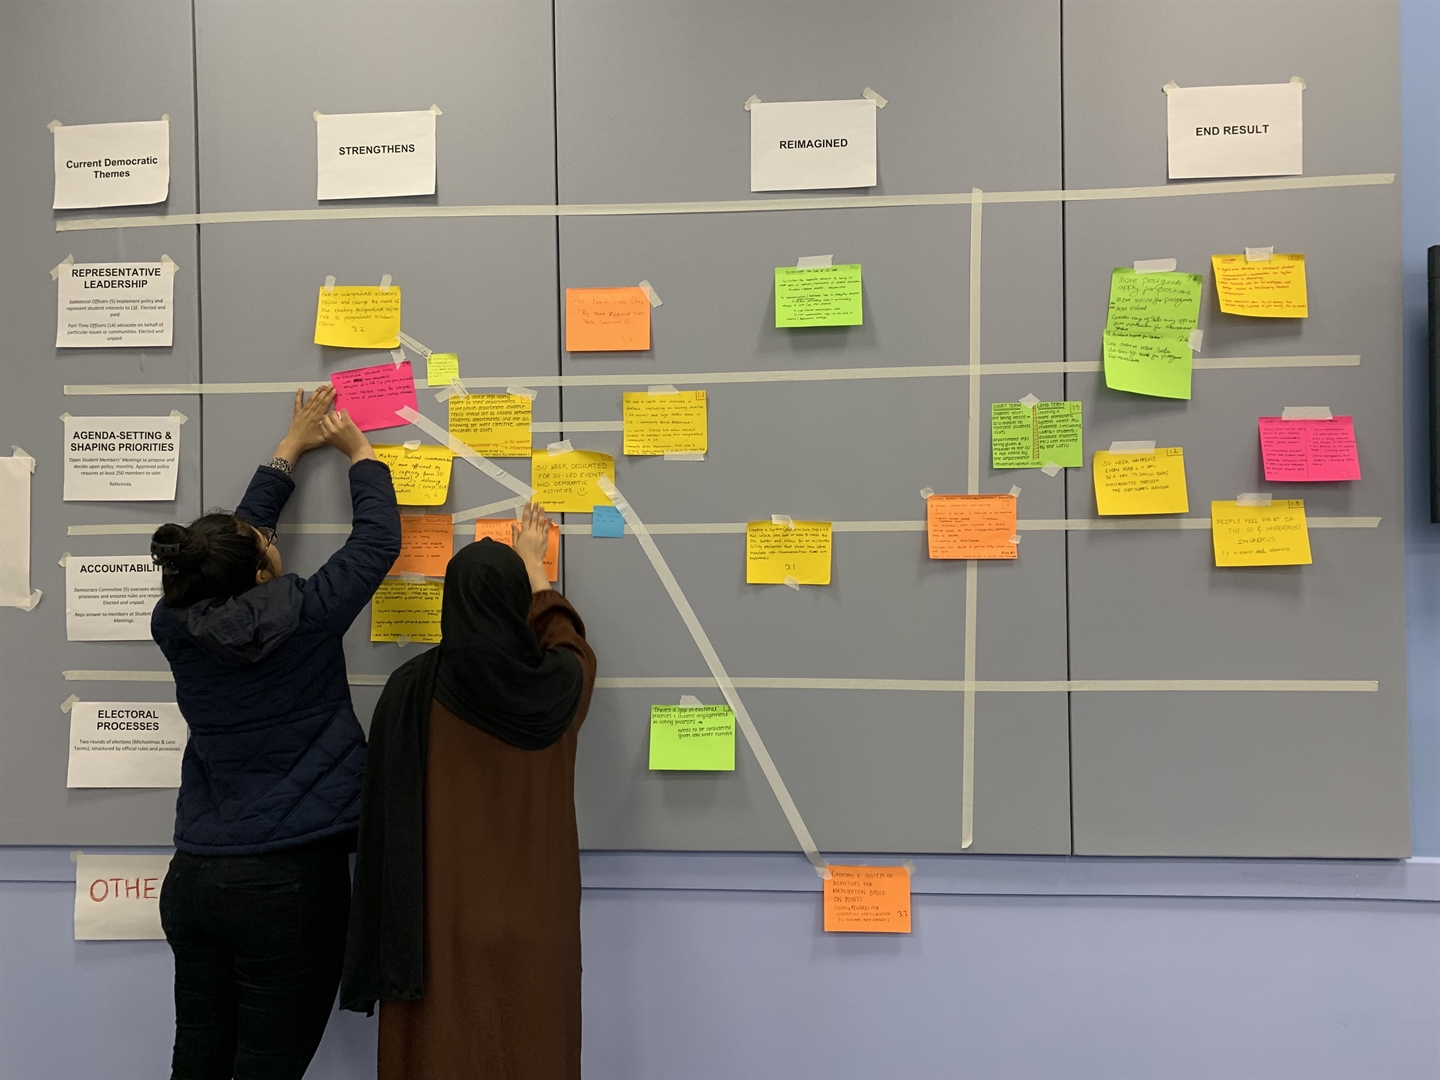 To make sure that the SU was prepared to undergo this constructive Democracy Review process, we conducted focus groups and surveys to gather feedback from LSE Students about what they would like to see. Here are the findings...